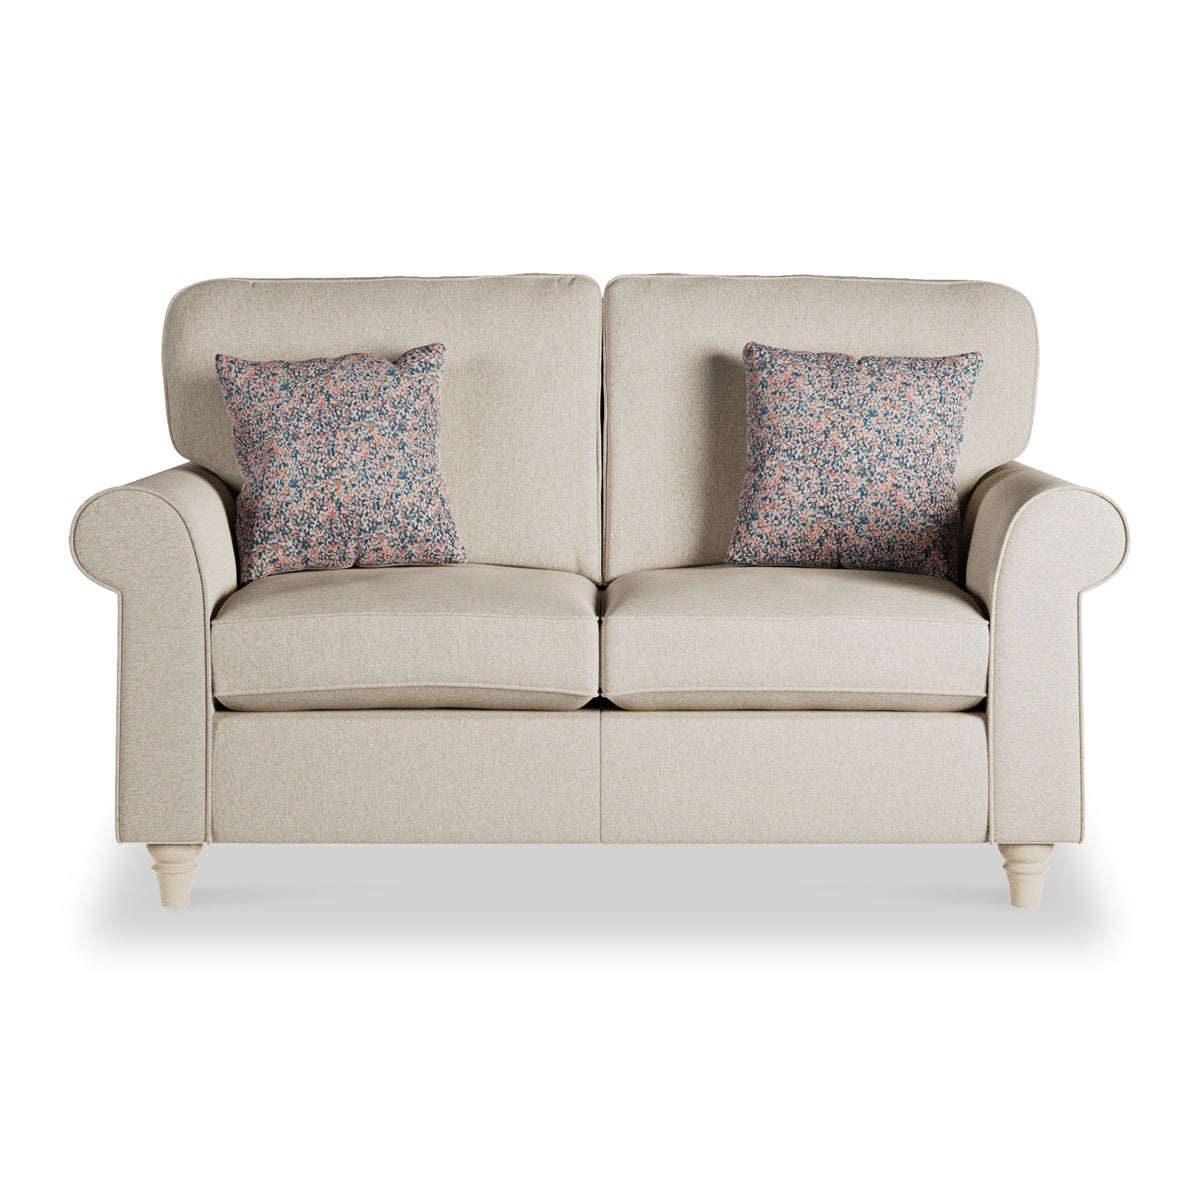 Thomas Sandstone 2 Seater Couch